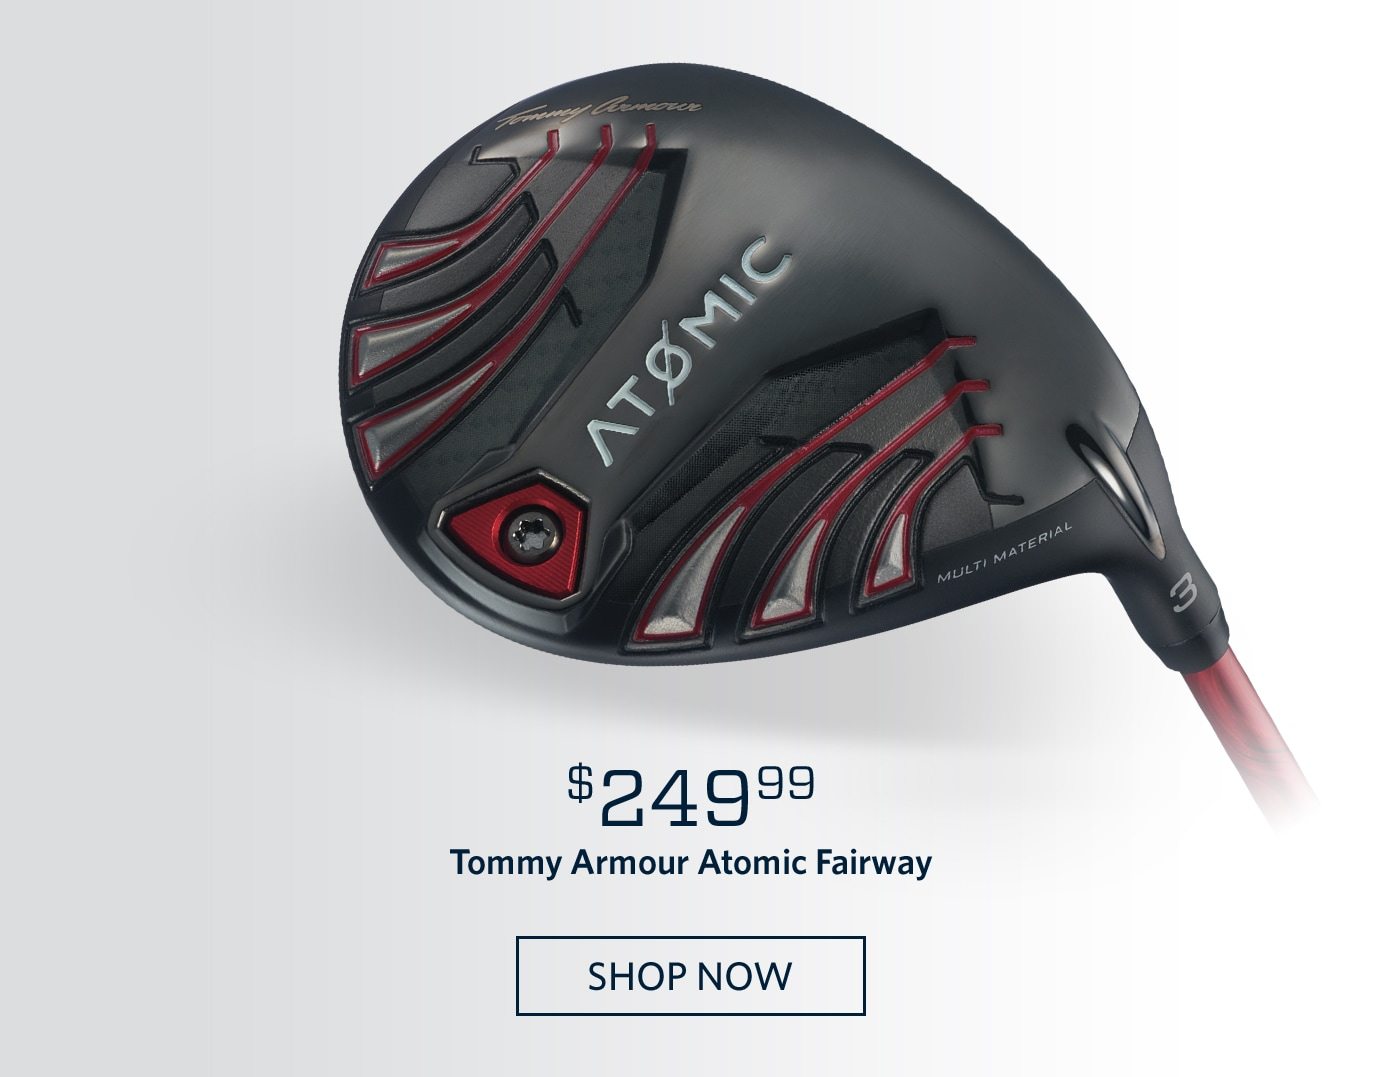 $249.99 Tommy Armour Atomic Fairway | SHOP NOW